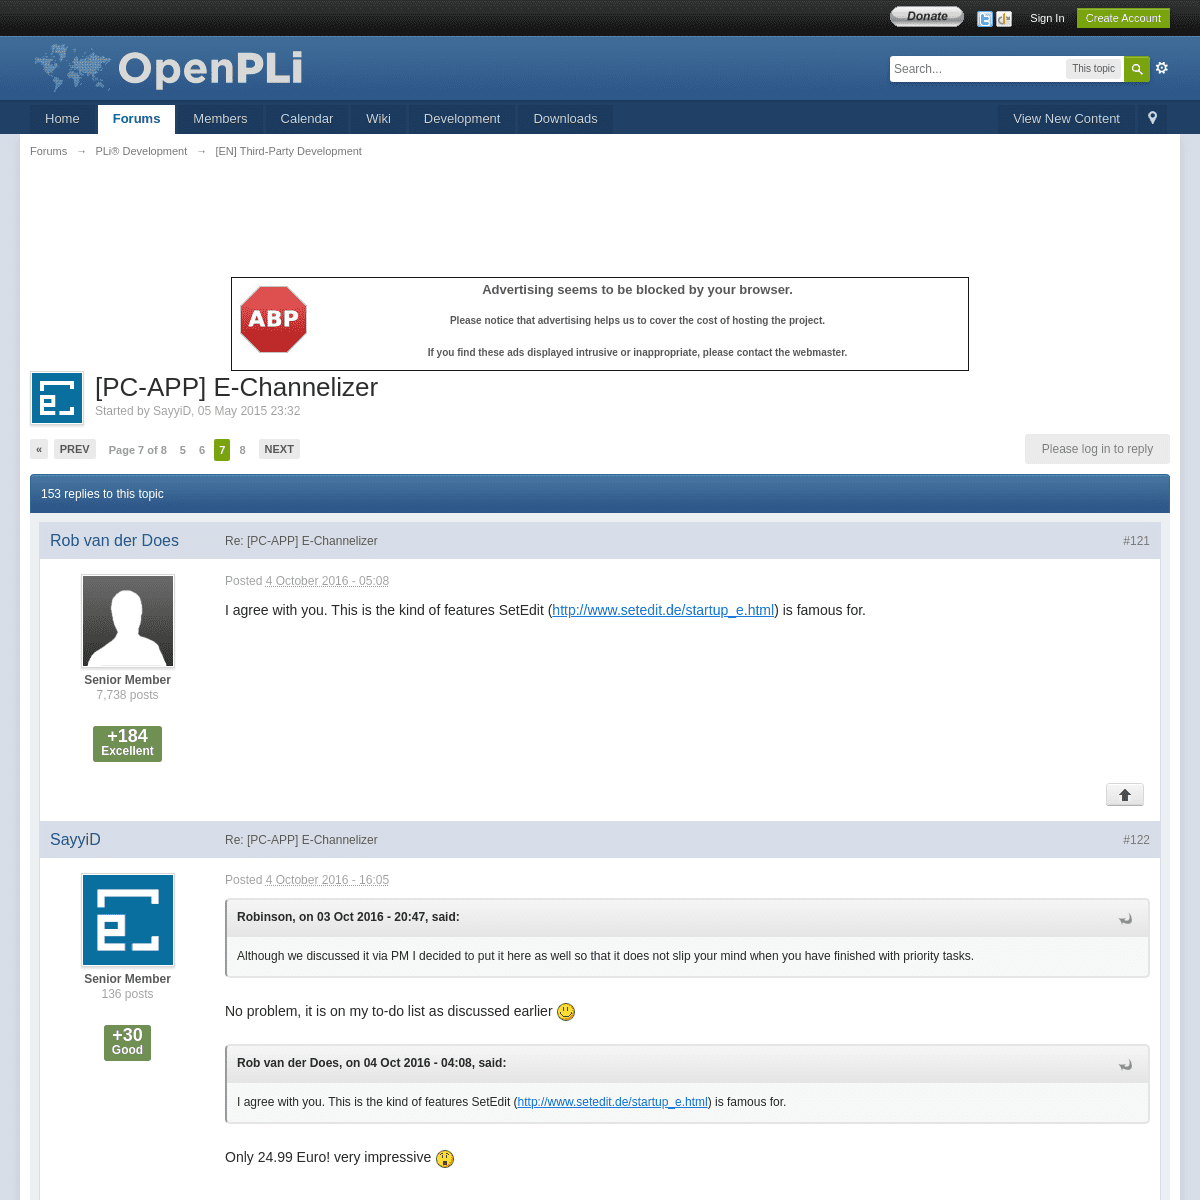 A complete backup of https://forums.openpli.org/topic/37851-pc-app-e-channelizer/page-7